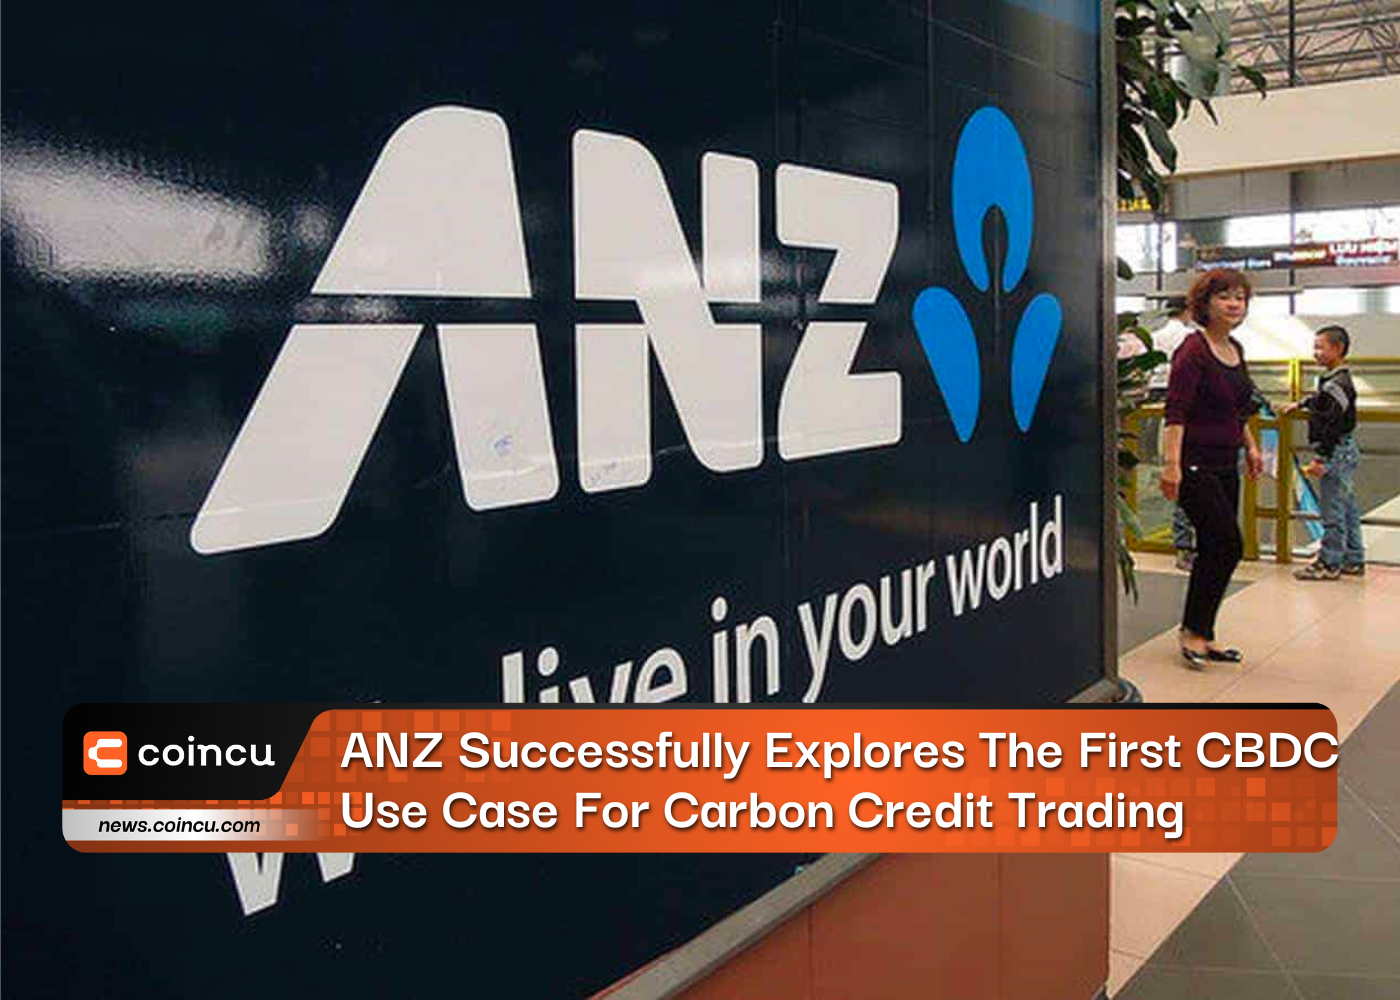 ANZ Successfully Explores The First CBDC Use Case For Carbon Credit Trading